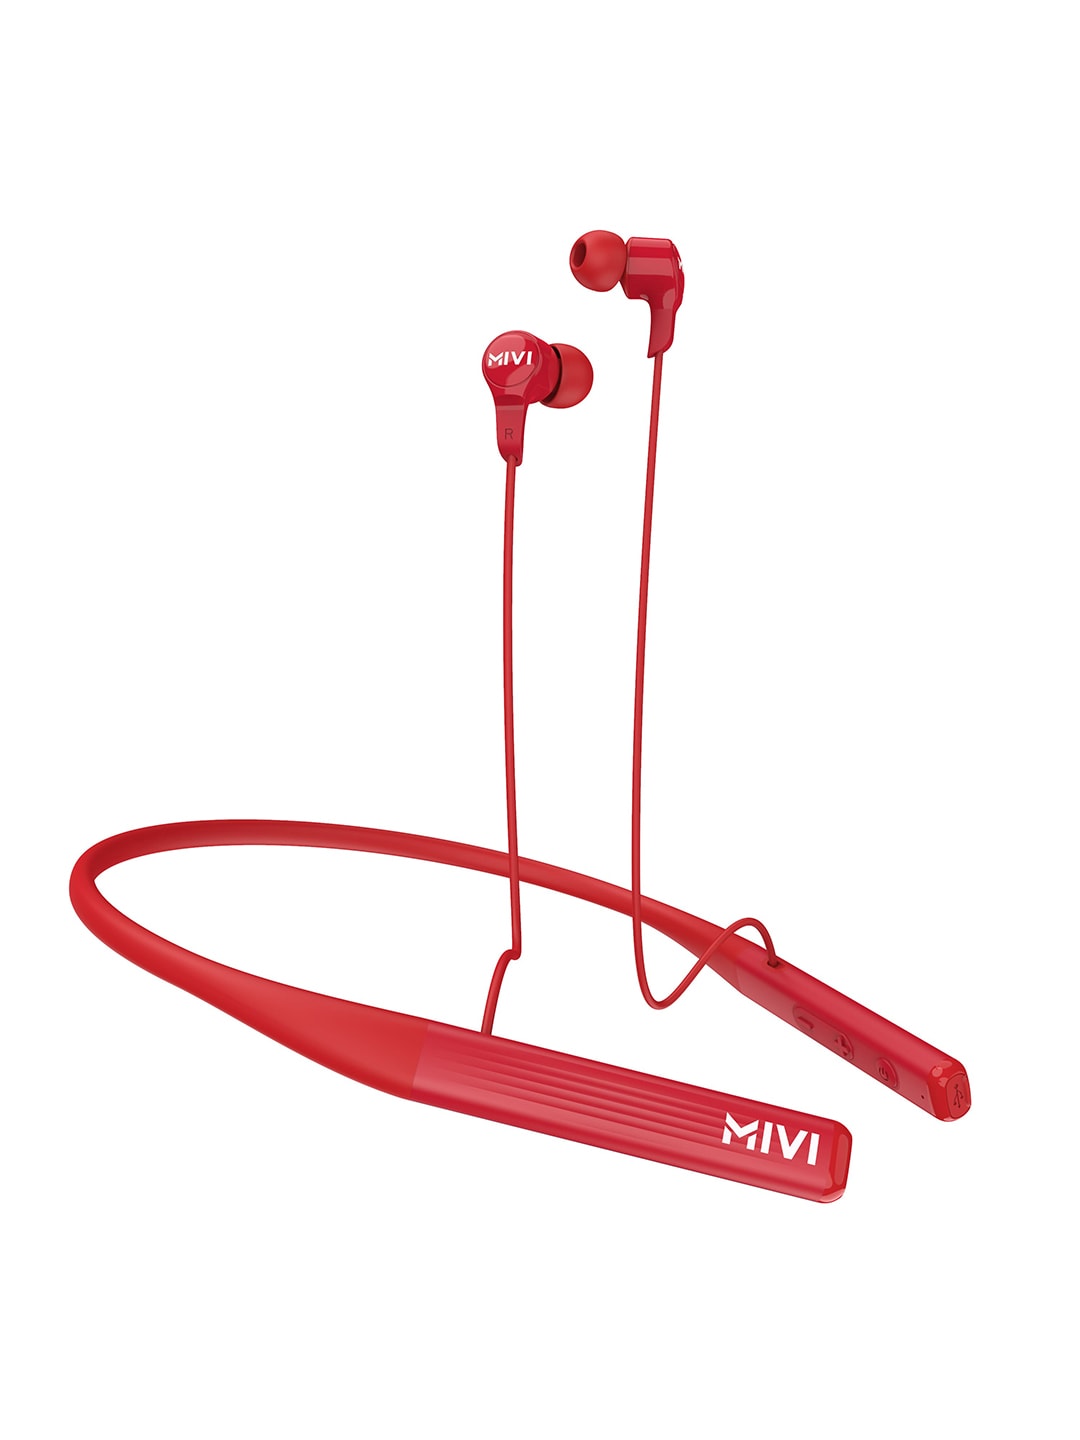 mivi Collar 2B Wireless Earphones with Fast Charging - Red Price in India